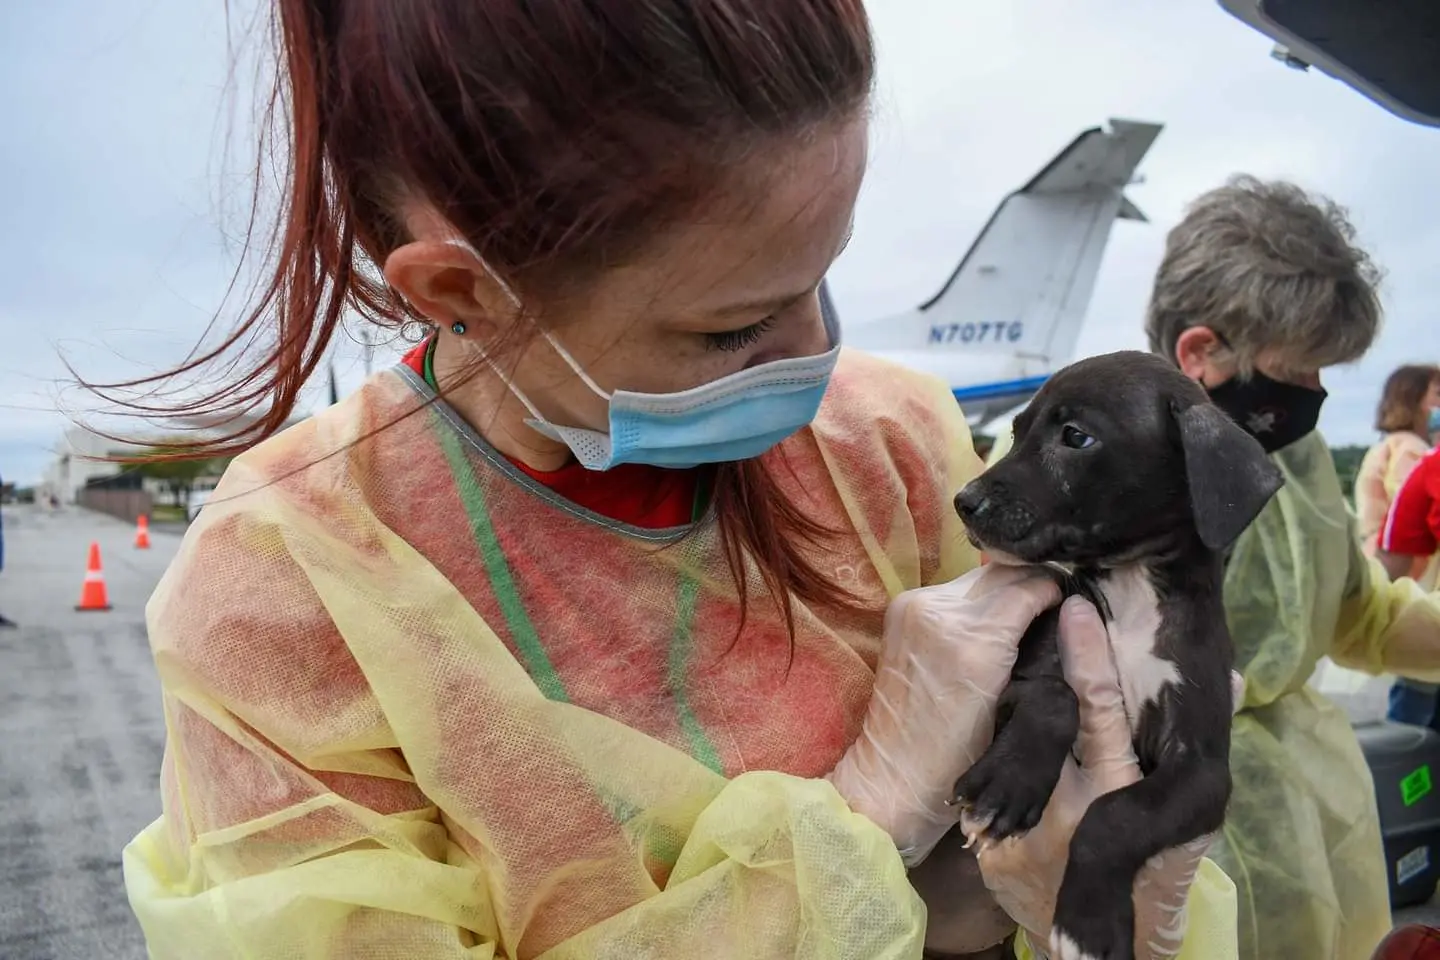 Dog Rescue during Disaster